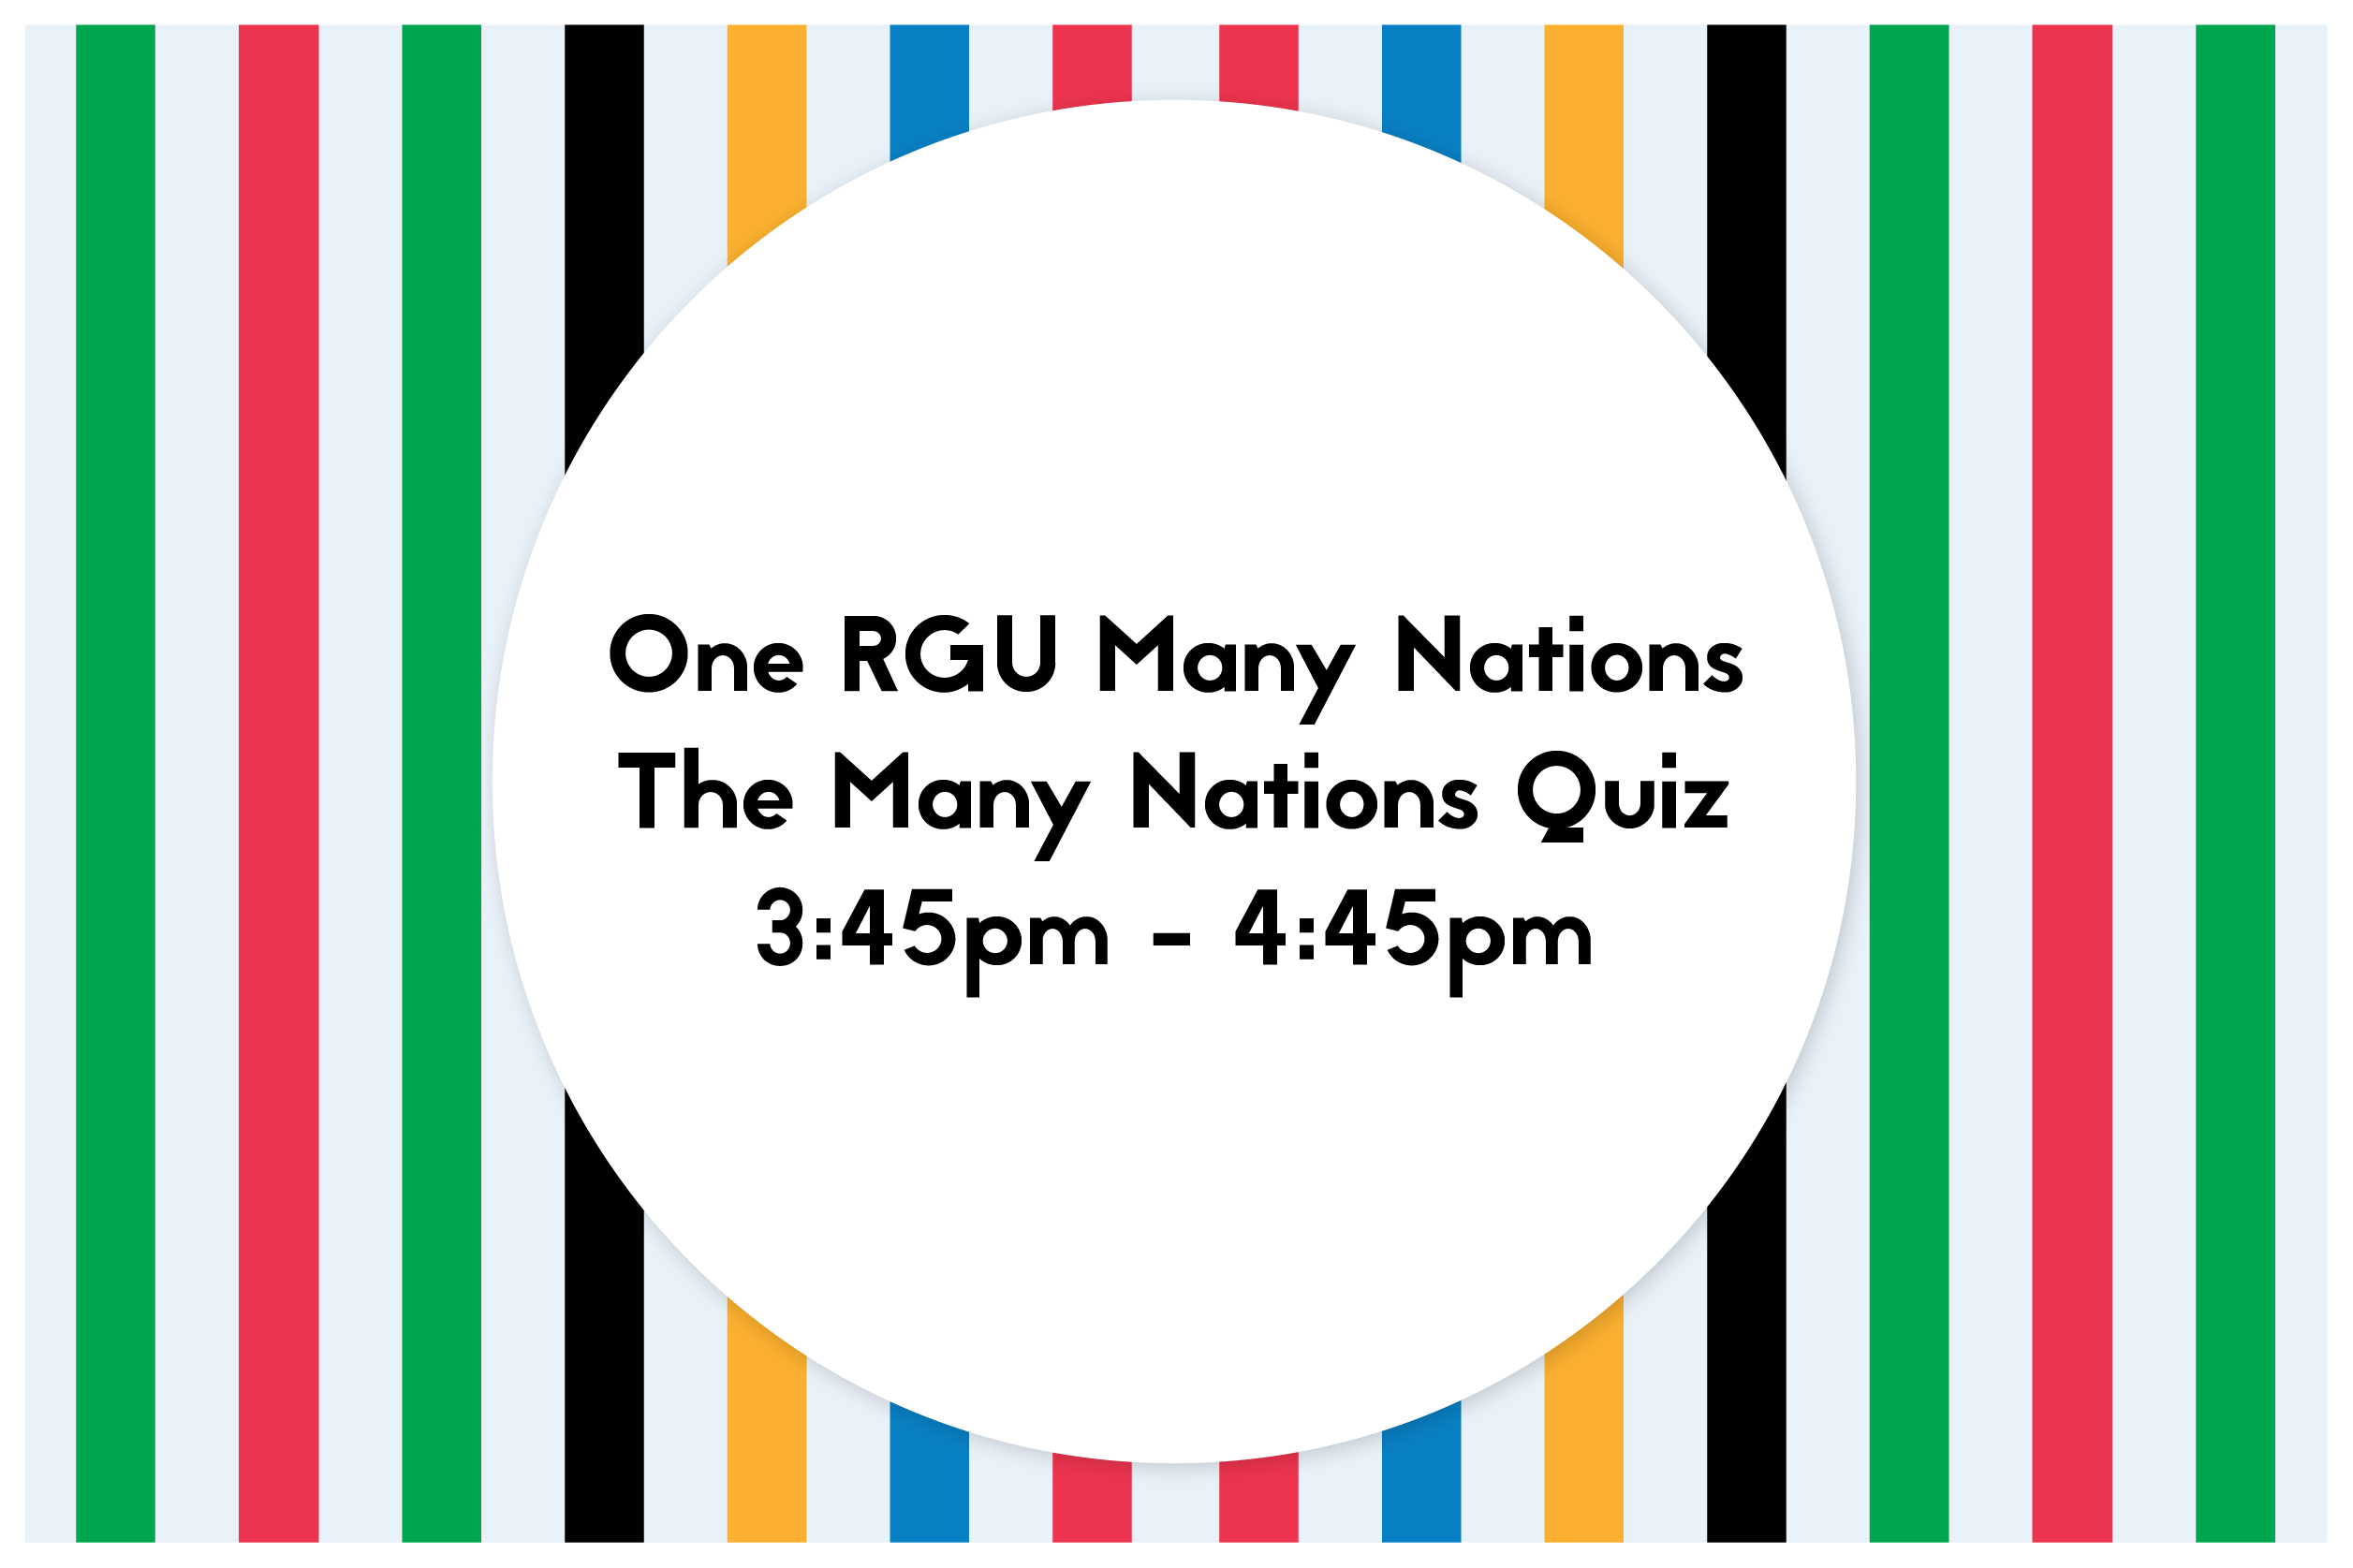 One RGU Many Nations - The Many Nations Quiz